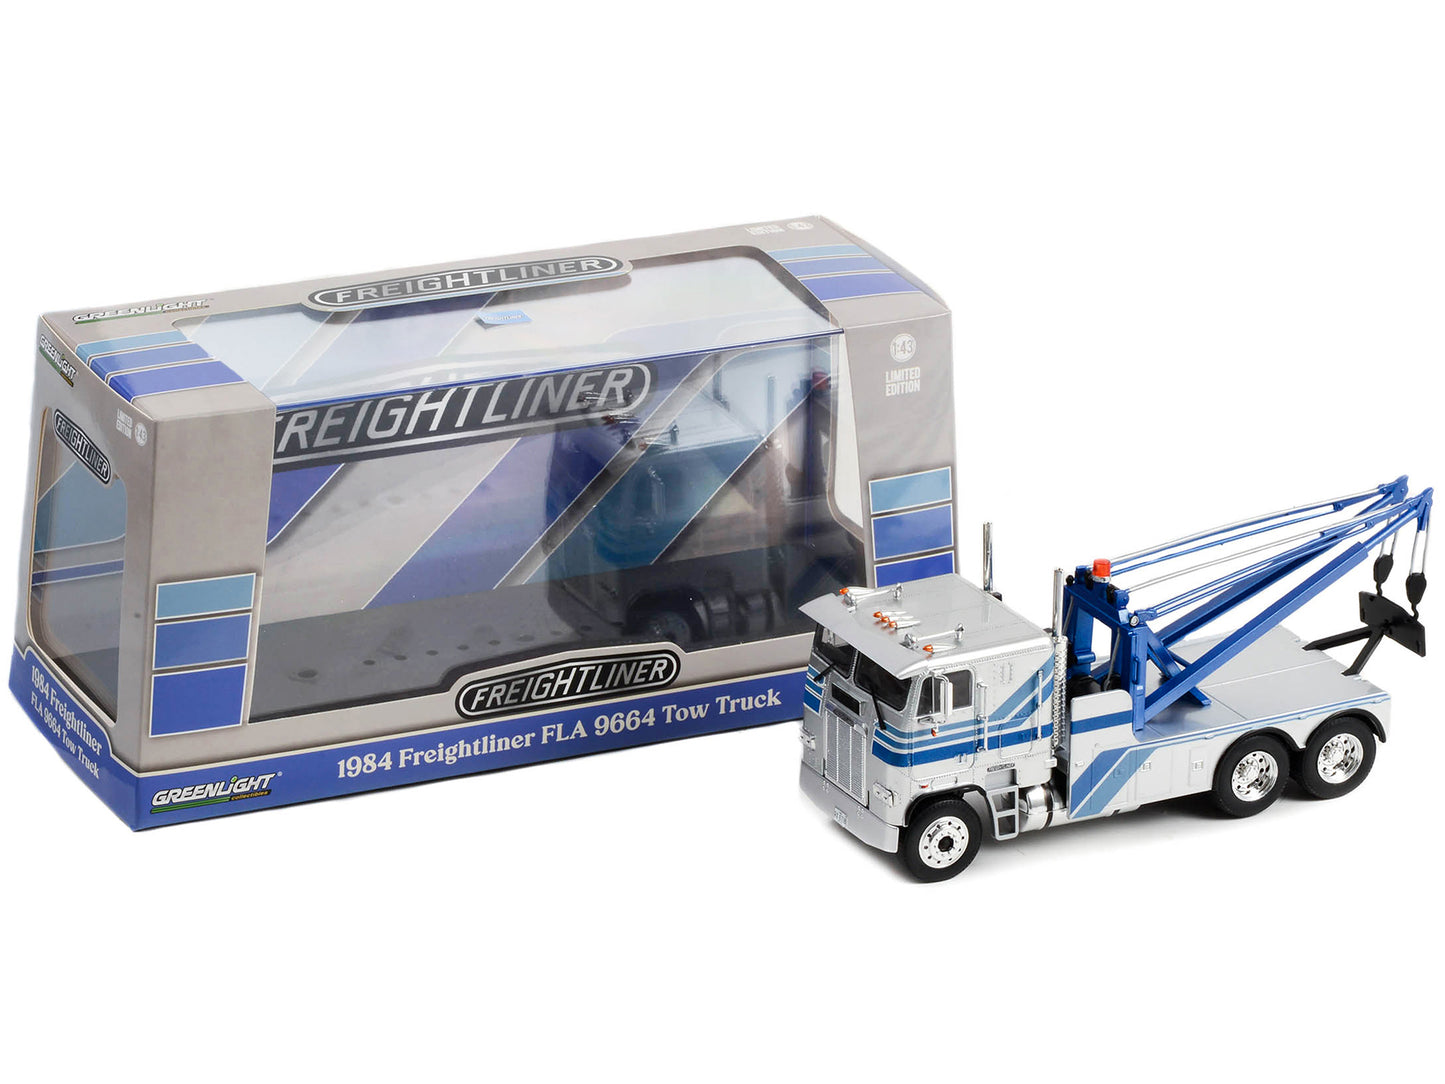 1984 freightliner fla 9664 tow truck with stripes 1/43 diecast model car